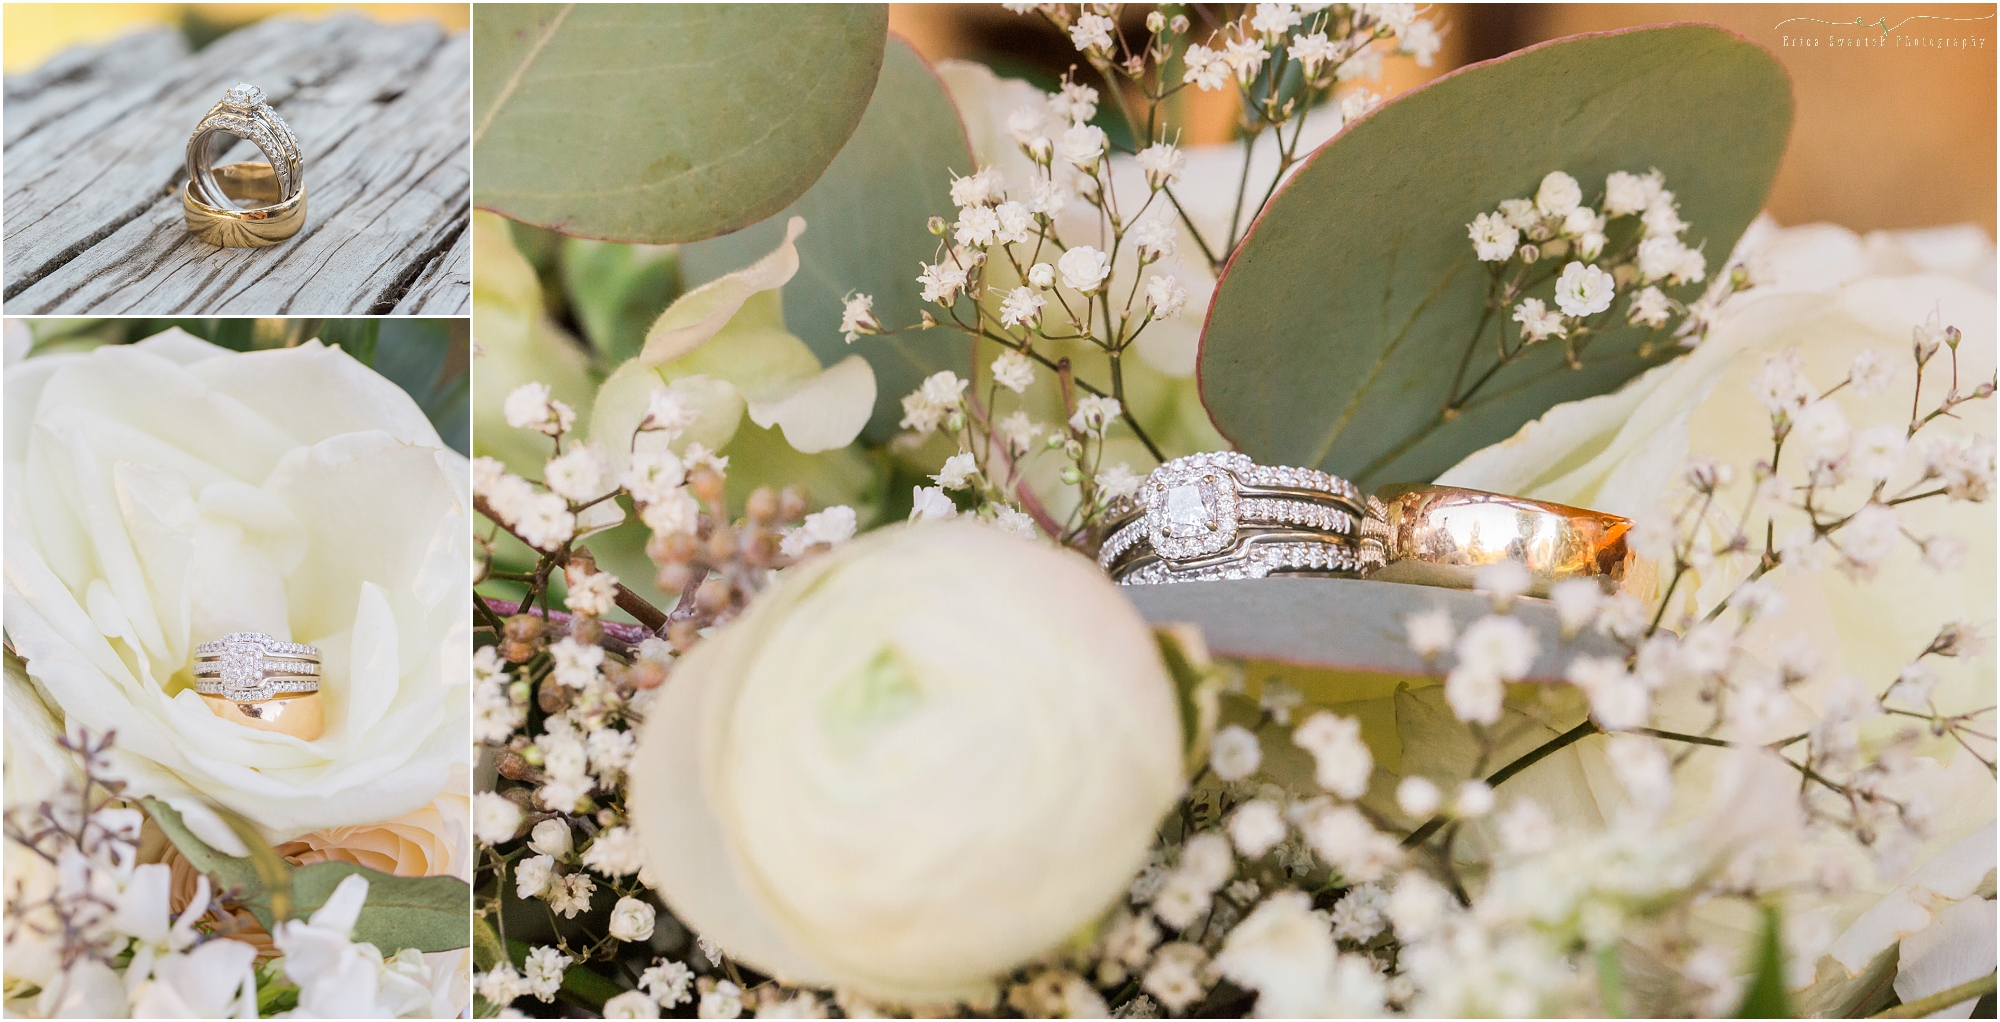 Beautiful wedding and engagement ring from Saxons in Bend OR for this vintage rustic chic Bend wedding. | Erica Swantek Photography. 